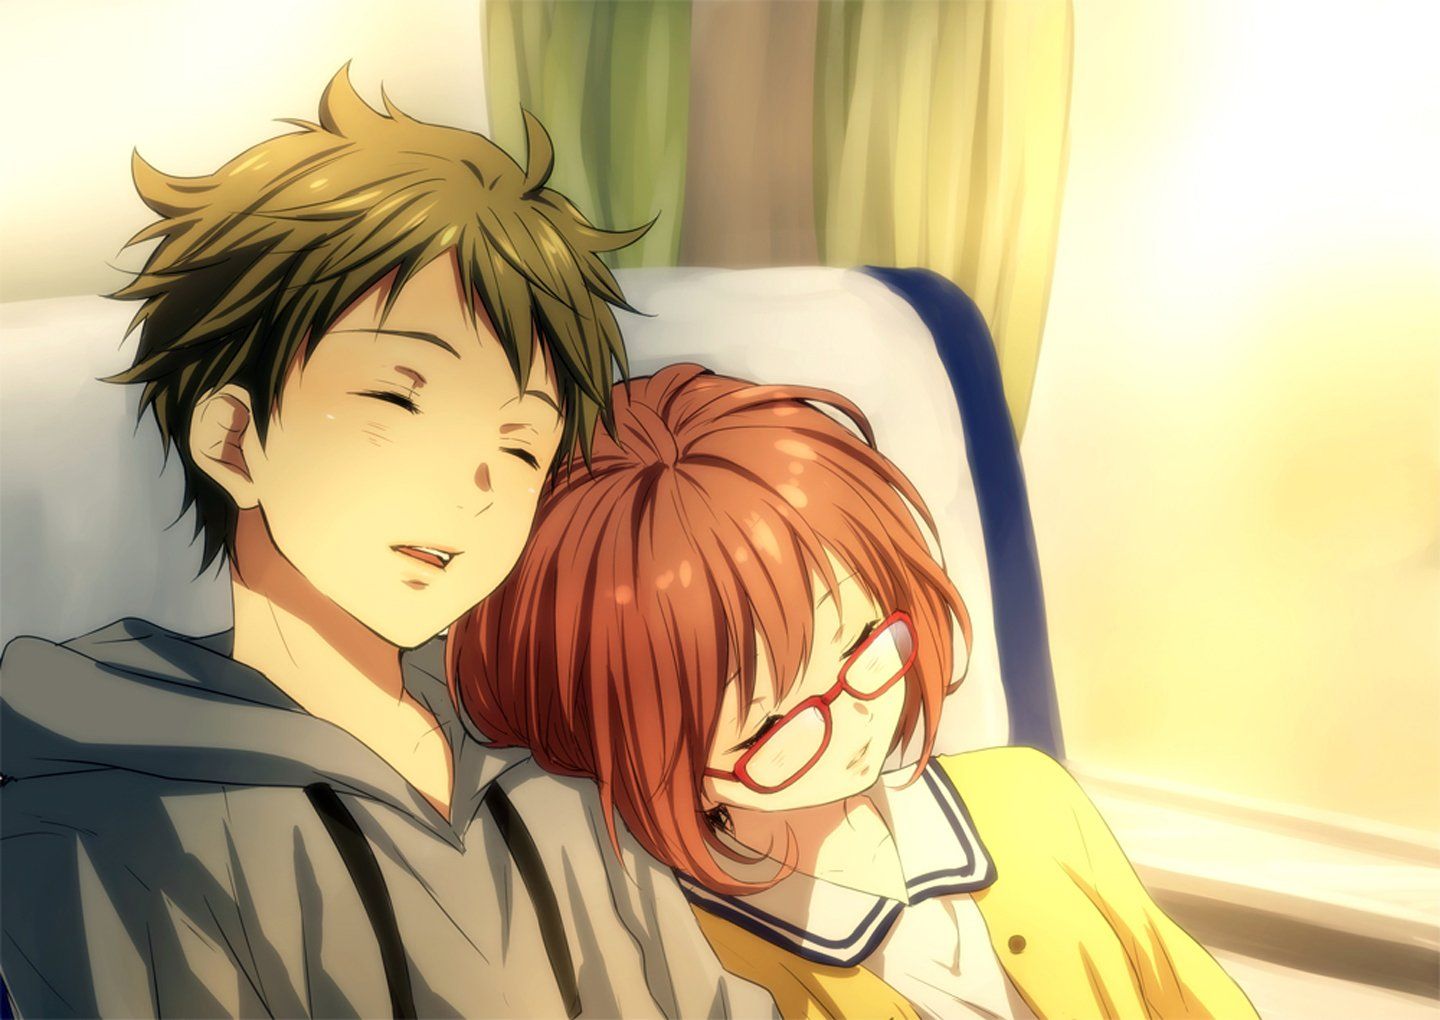 Sleeping Anime Couples Wallpapers Wallpaper Cave